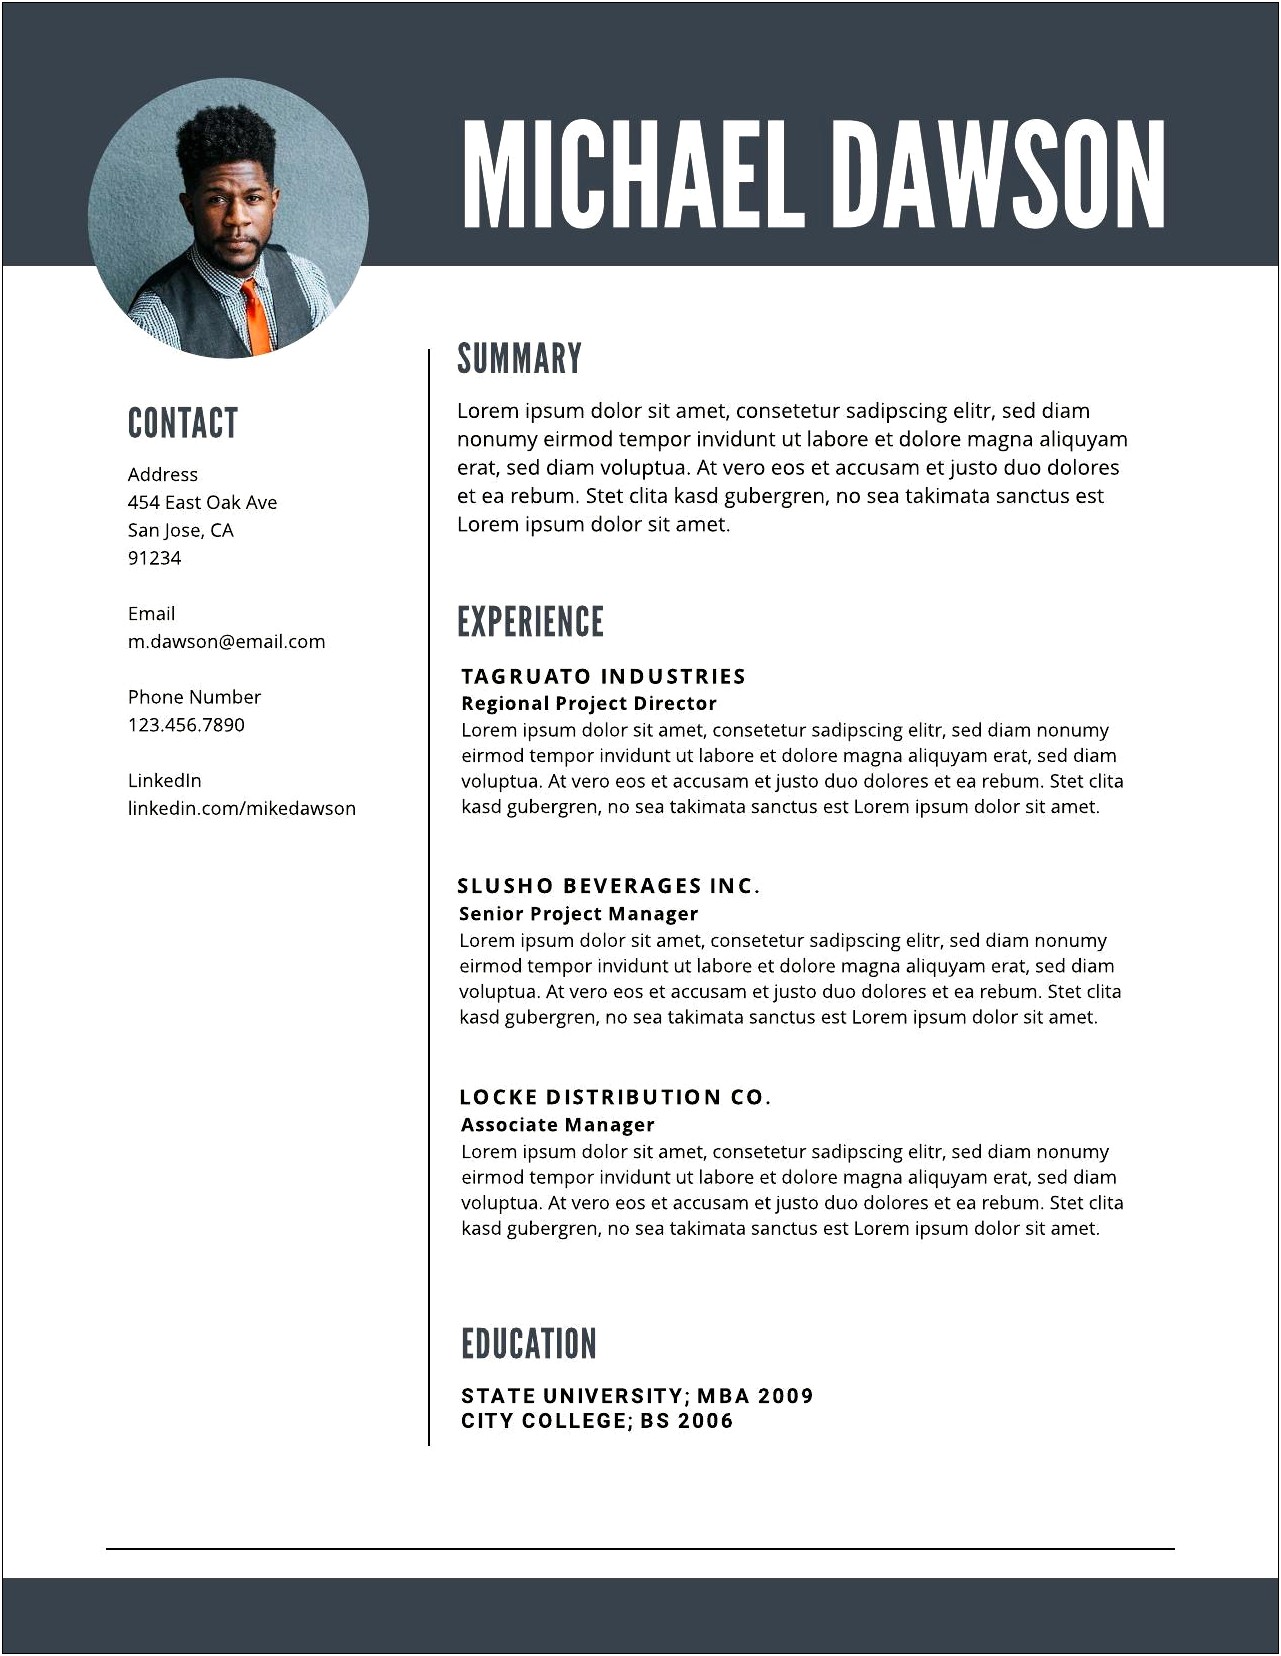 Resume Examples Including Testimony Or Commendations